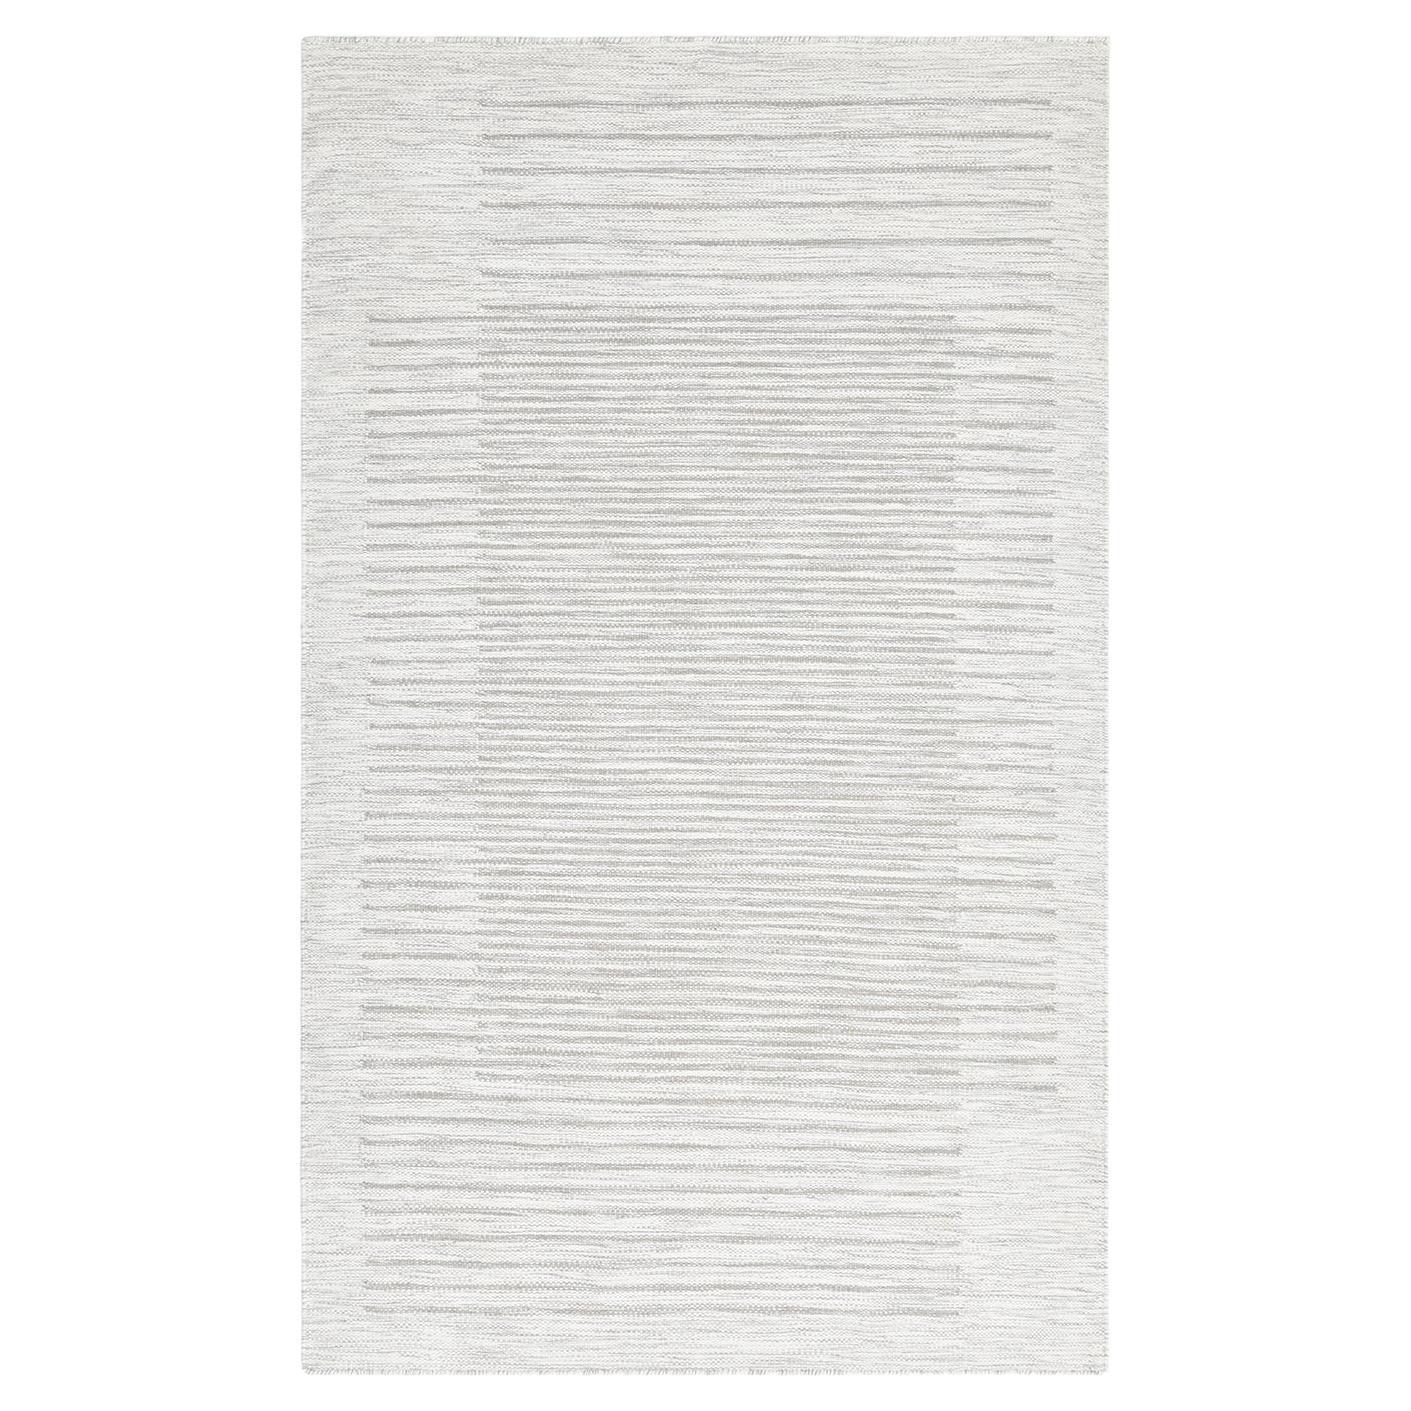 Solo Rugs Flatweave Striped Hand Woven Light Gray Area Rug For Sale